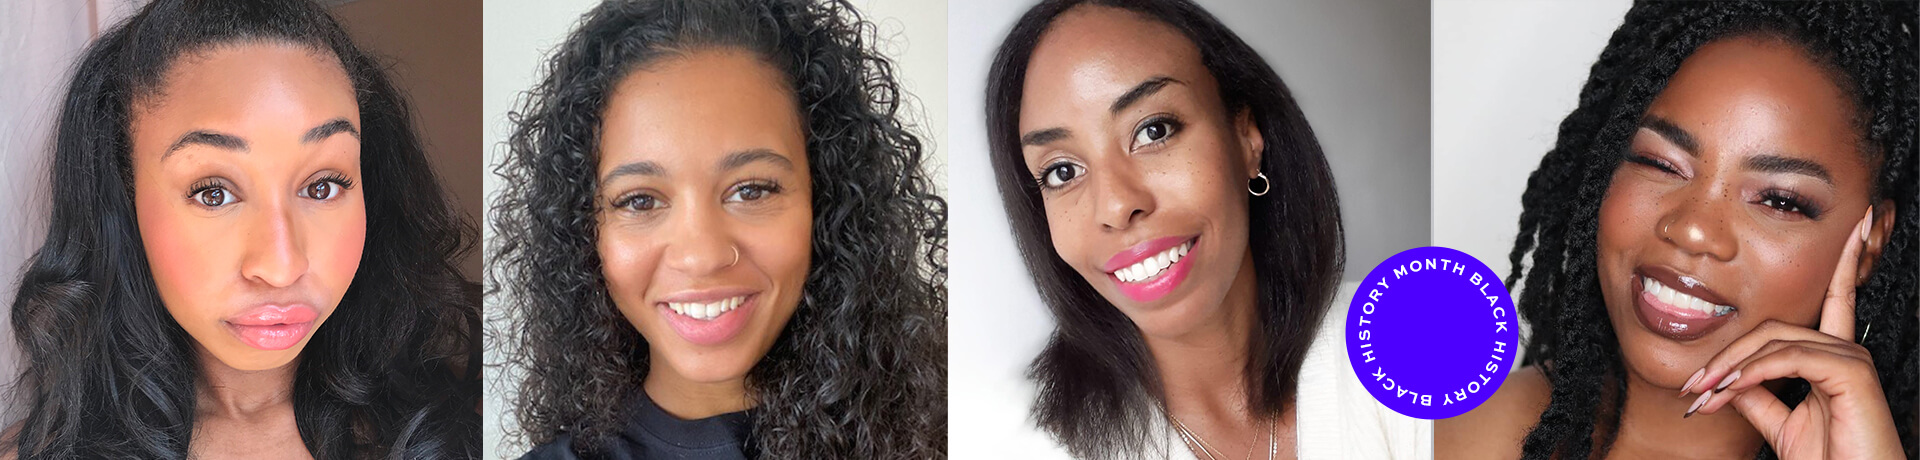 Working as a black woman in the beauty industry